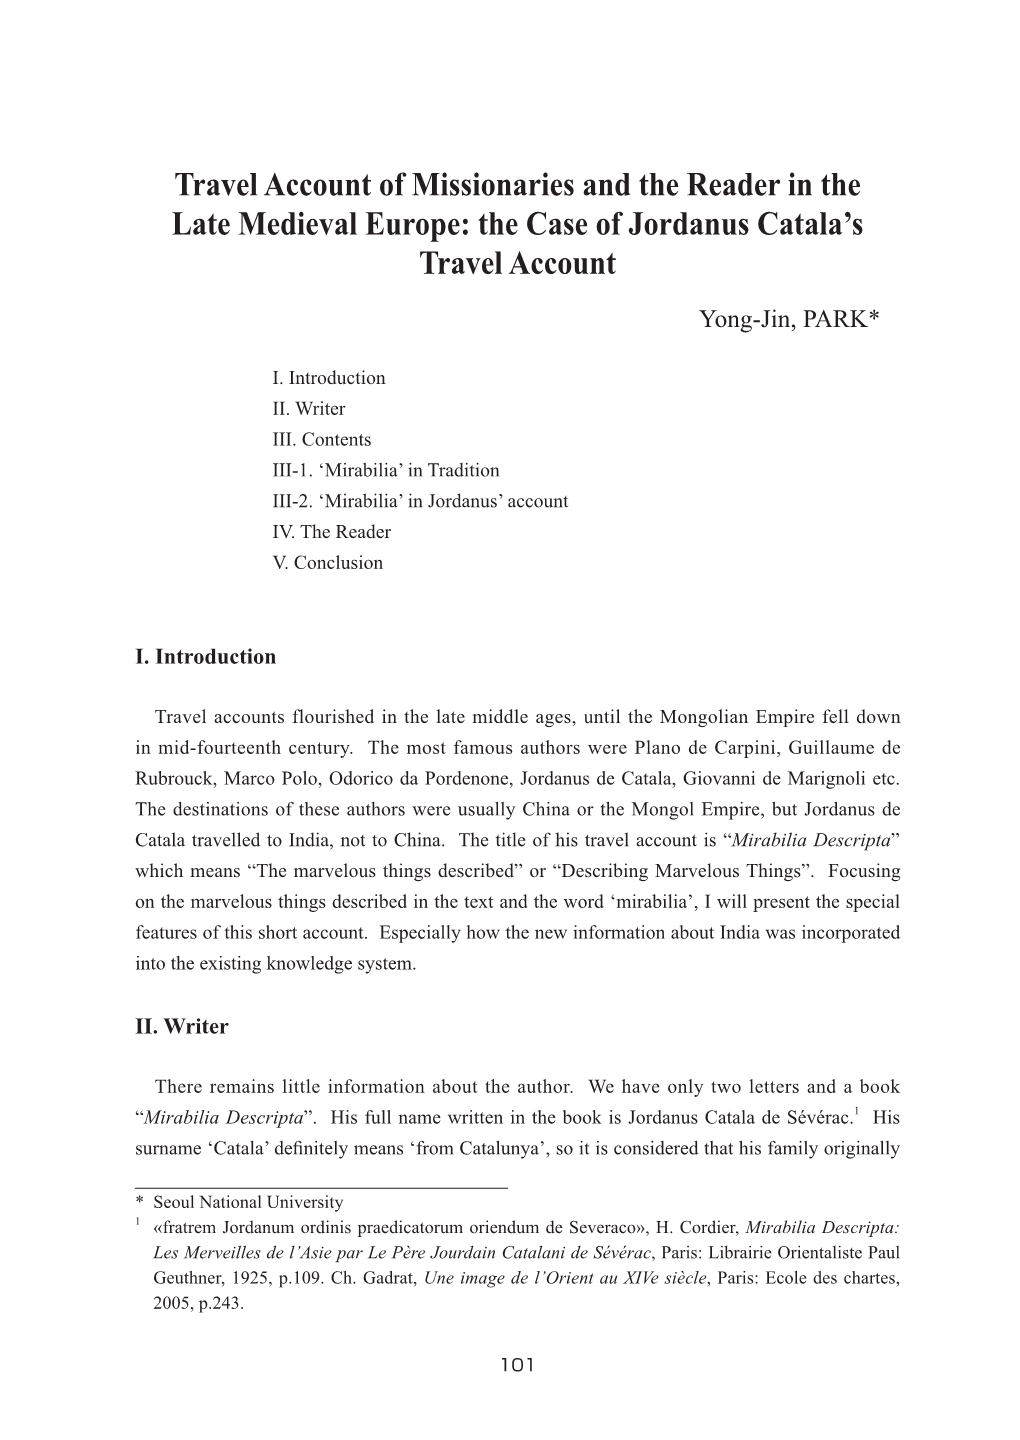 Travel Account of Missionaries and the Reader in the Late Medieval Europe: the Case of Jordanus Catala's Travel Account